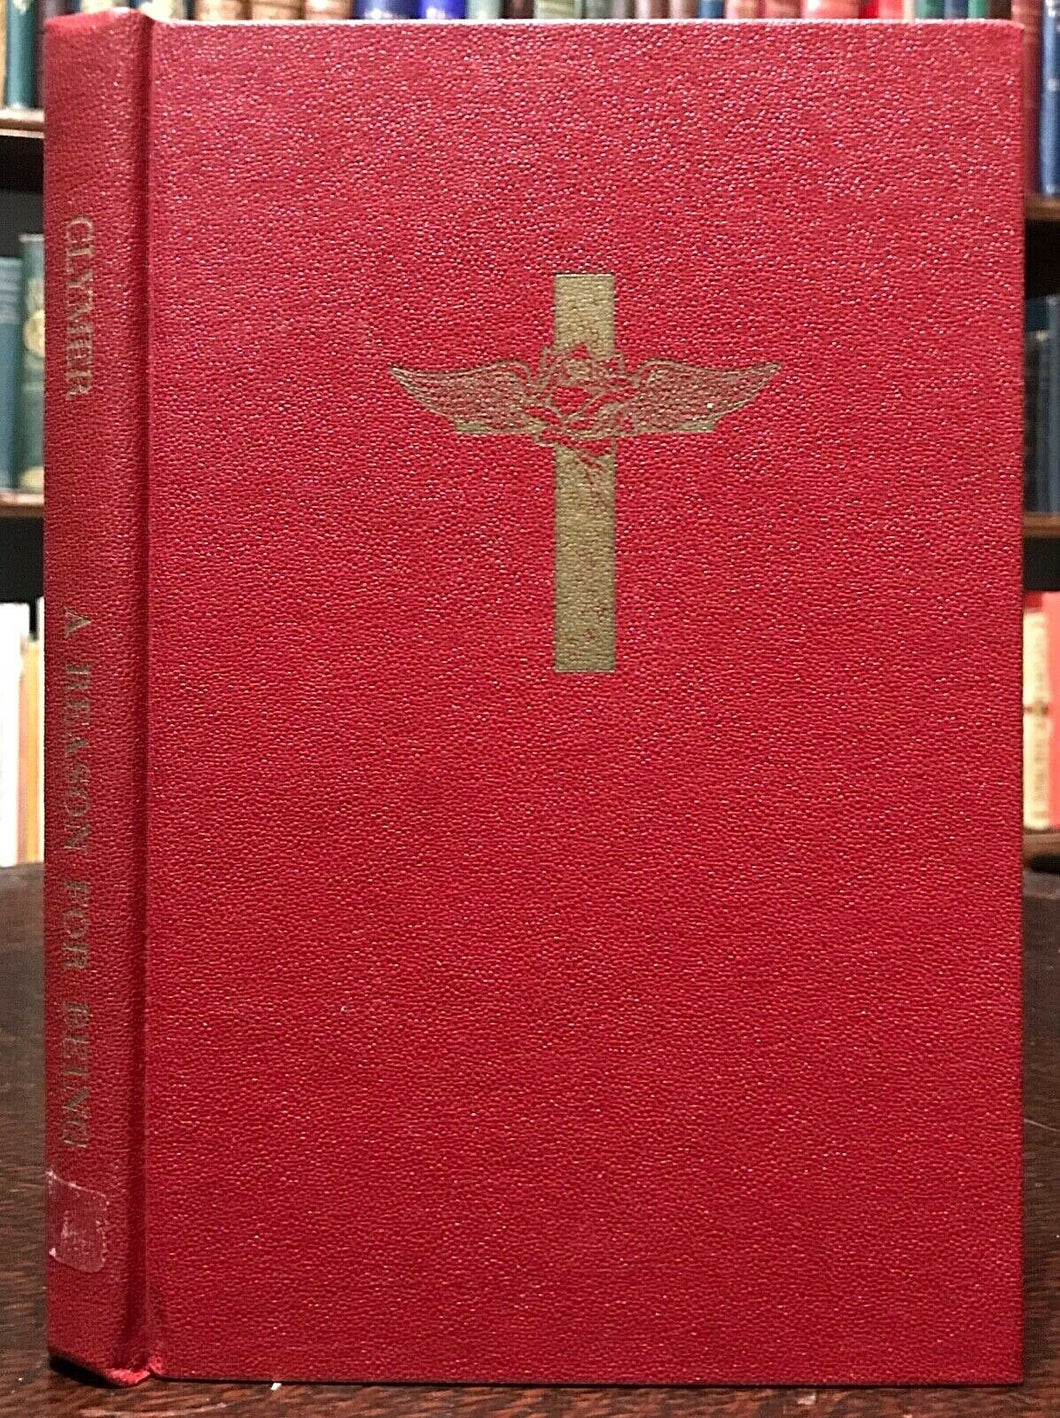 REASON FOR BEING - Clymer, 1st Ed 1971 - ROSICRUCIAN ROSE CROIX METAPHYSICS